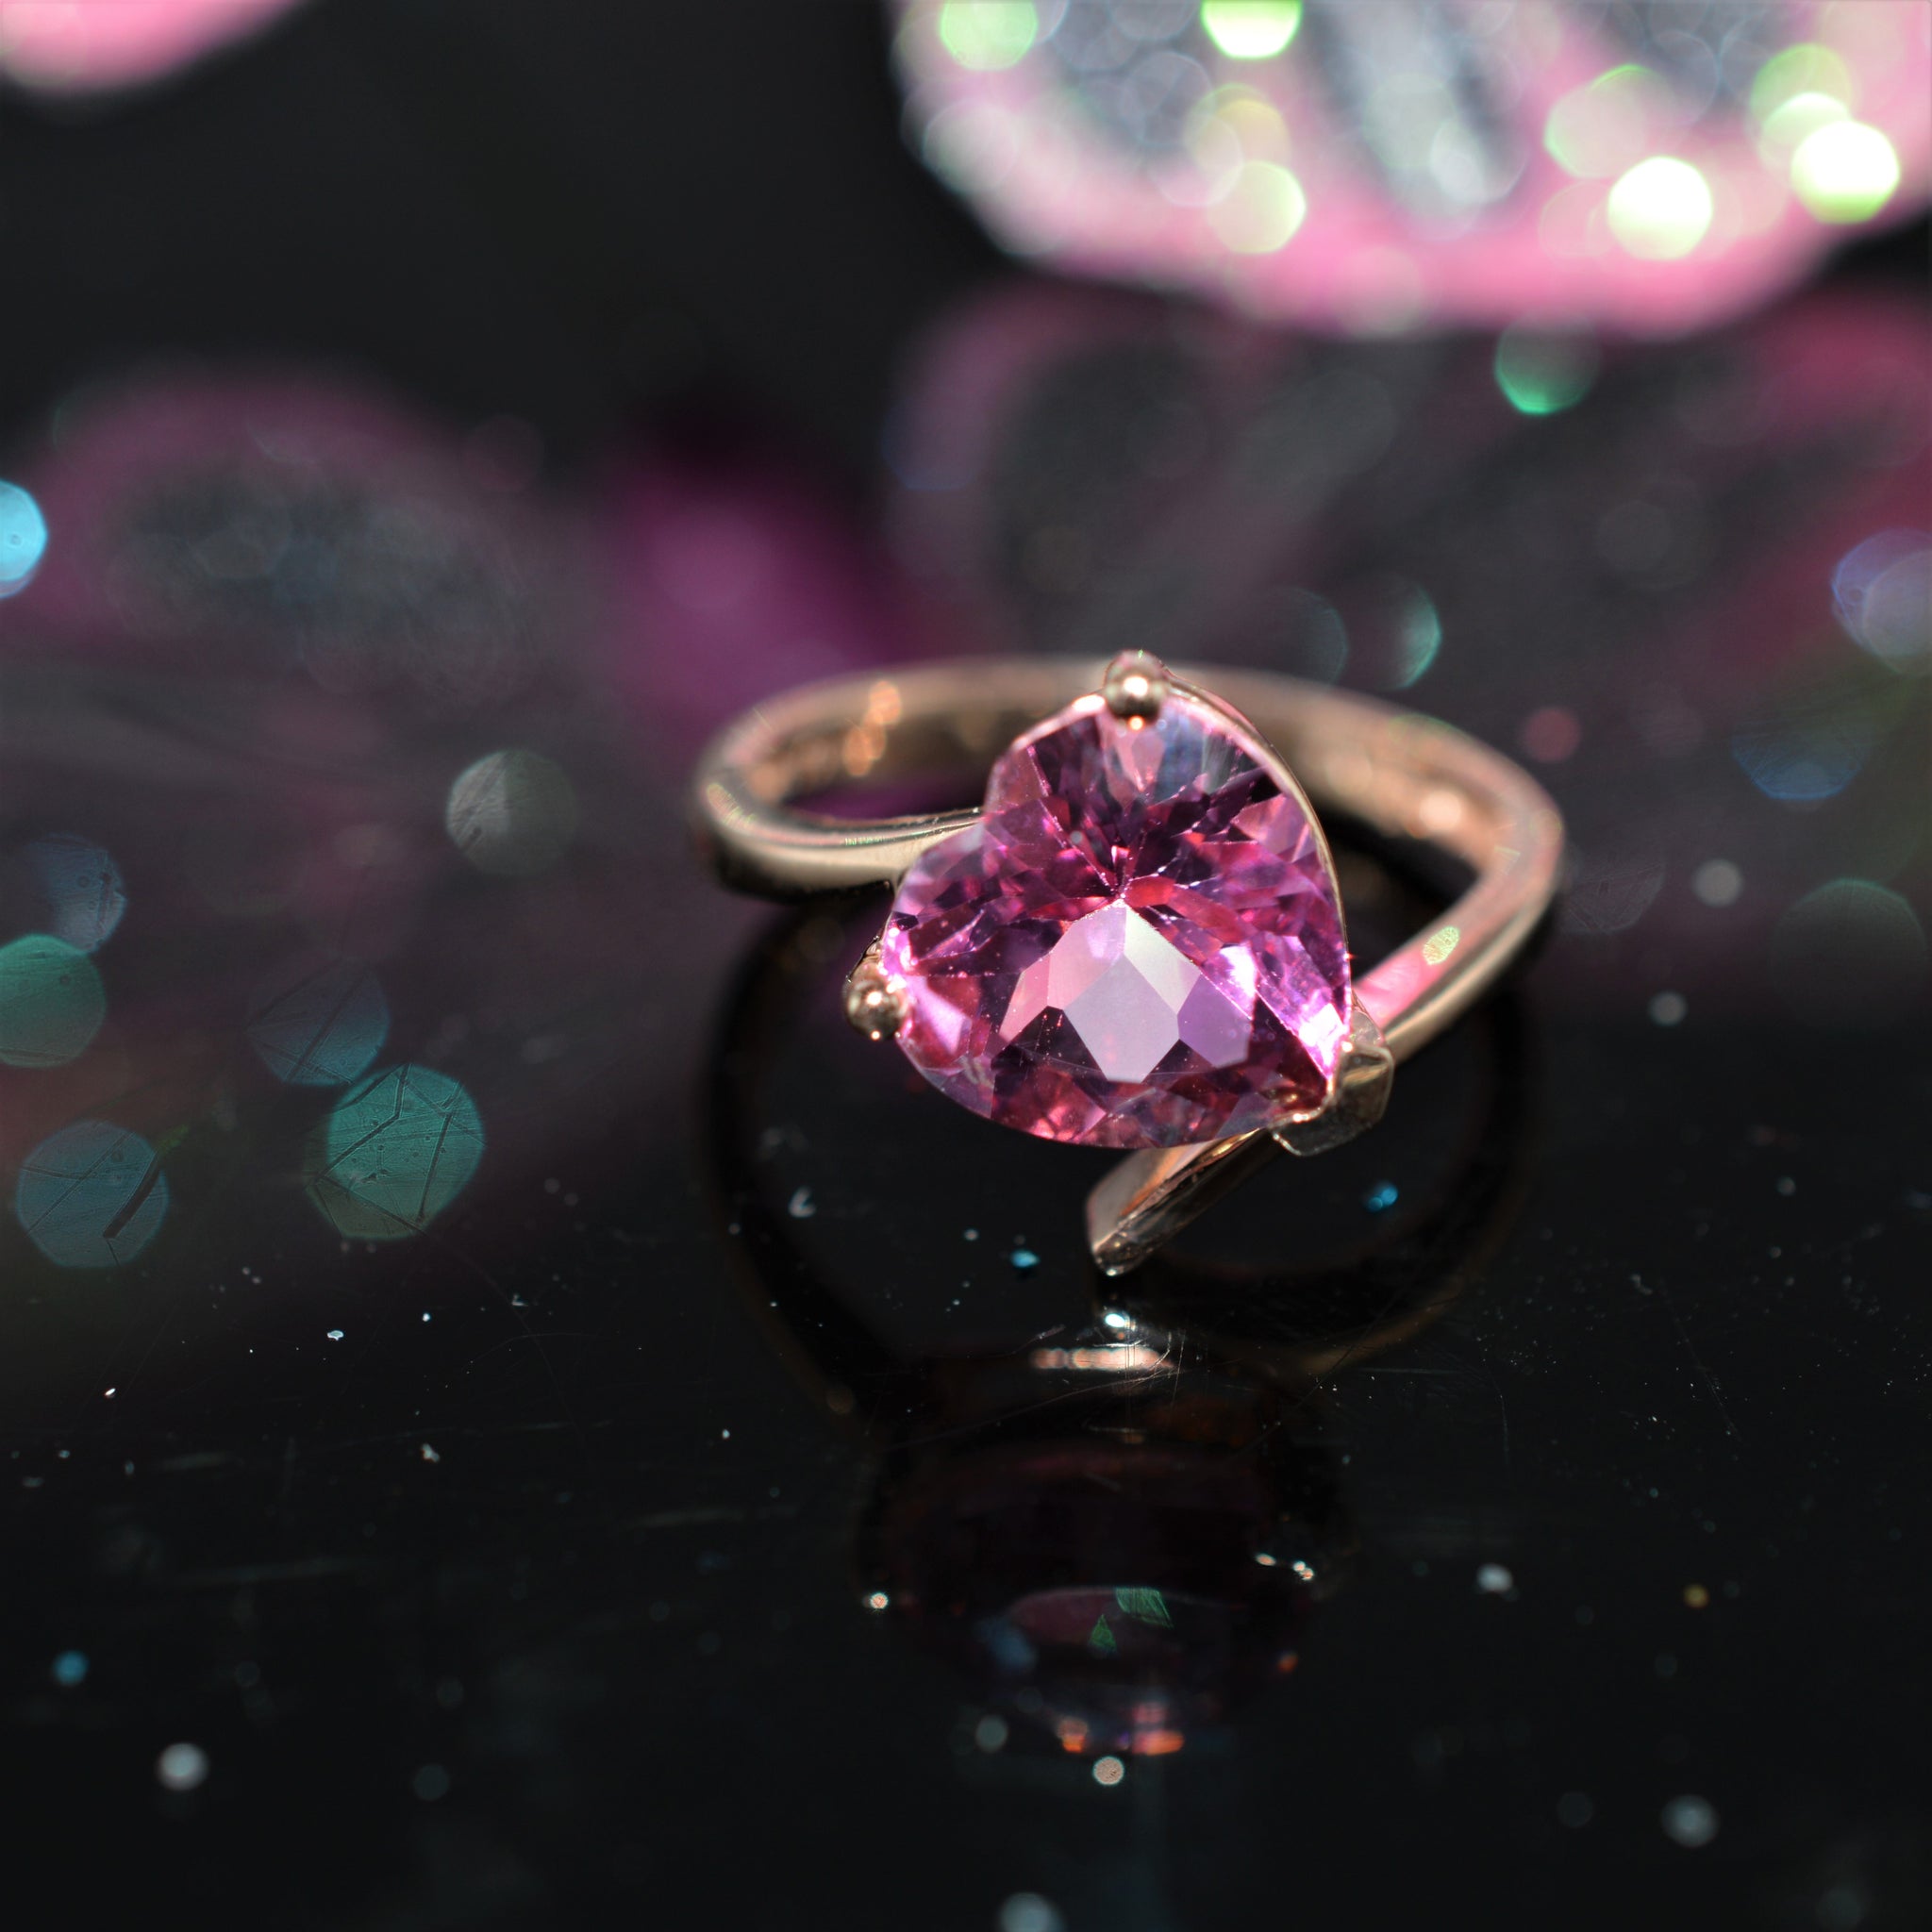 Heart-Shaped Pink Sapphire Ring